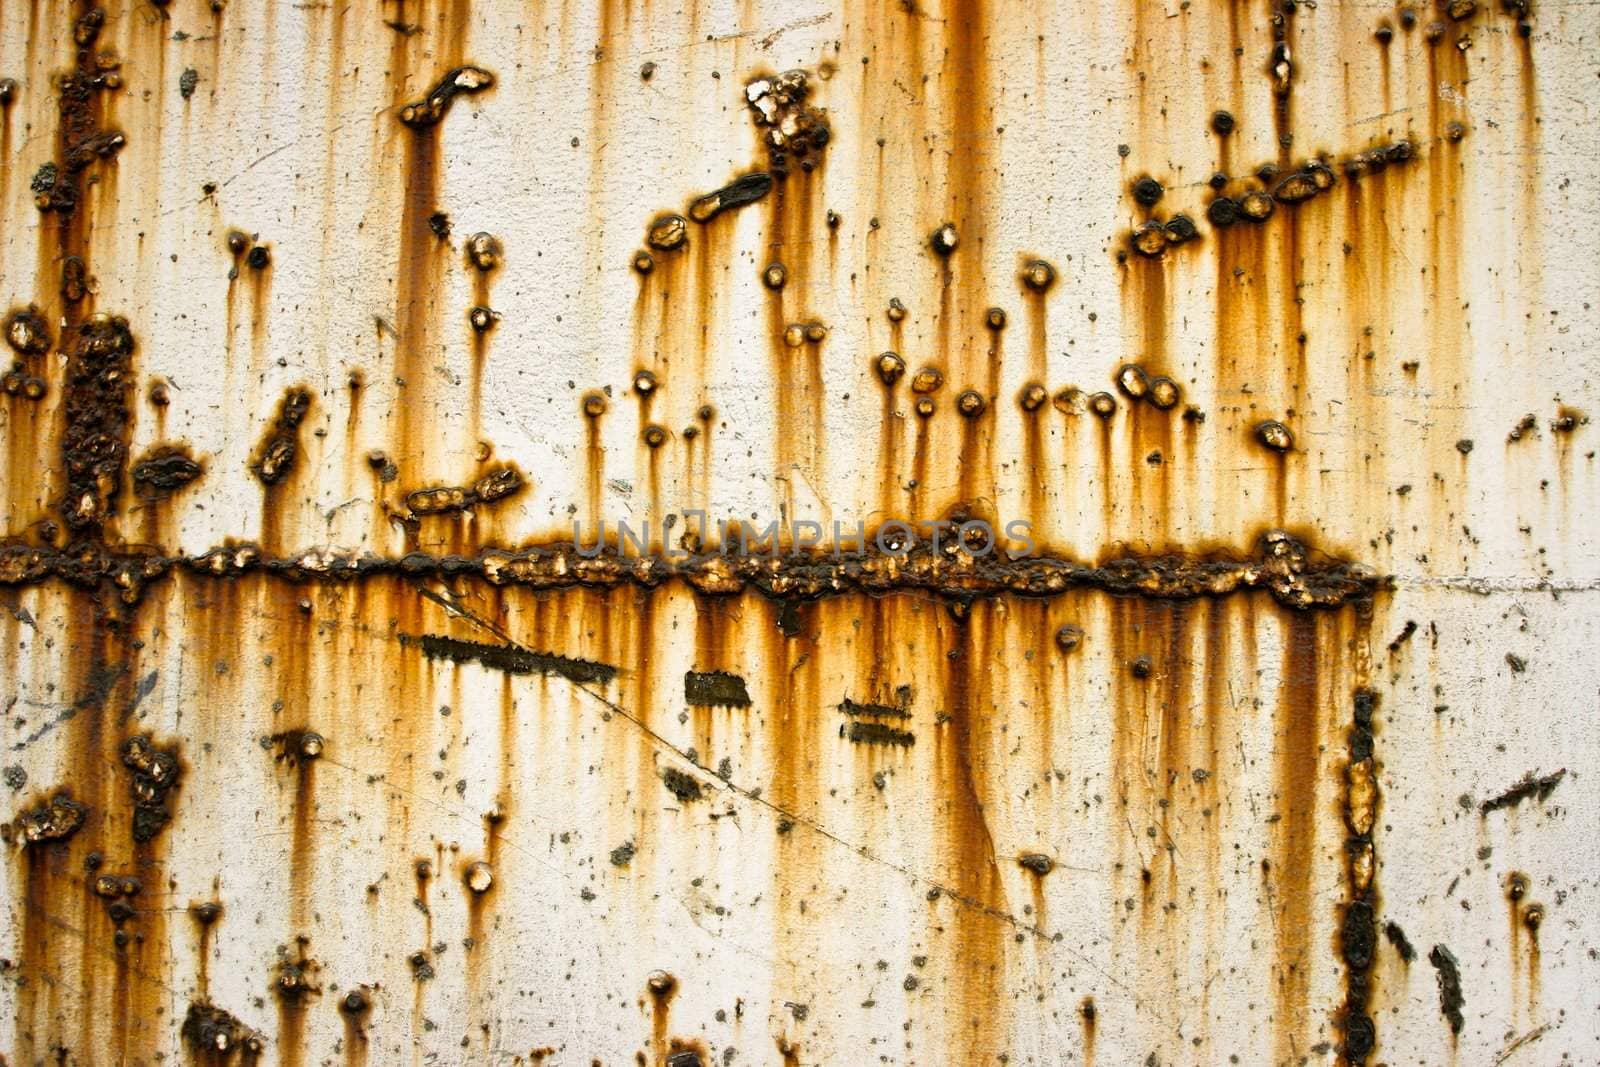 Rusty Metallic Wall with rusty spots and stains